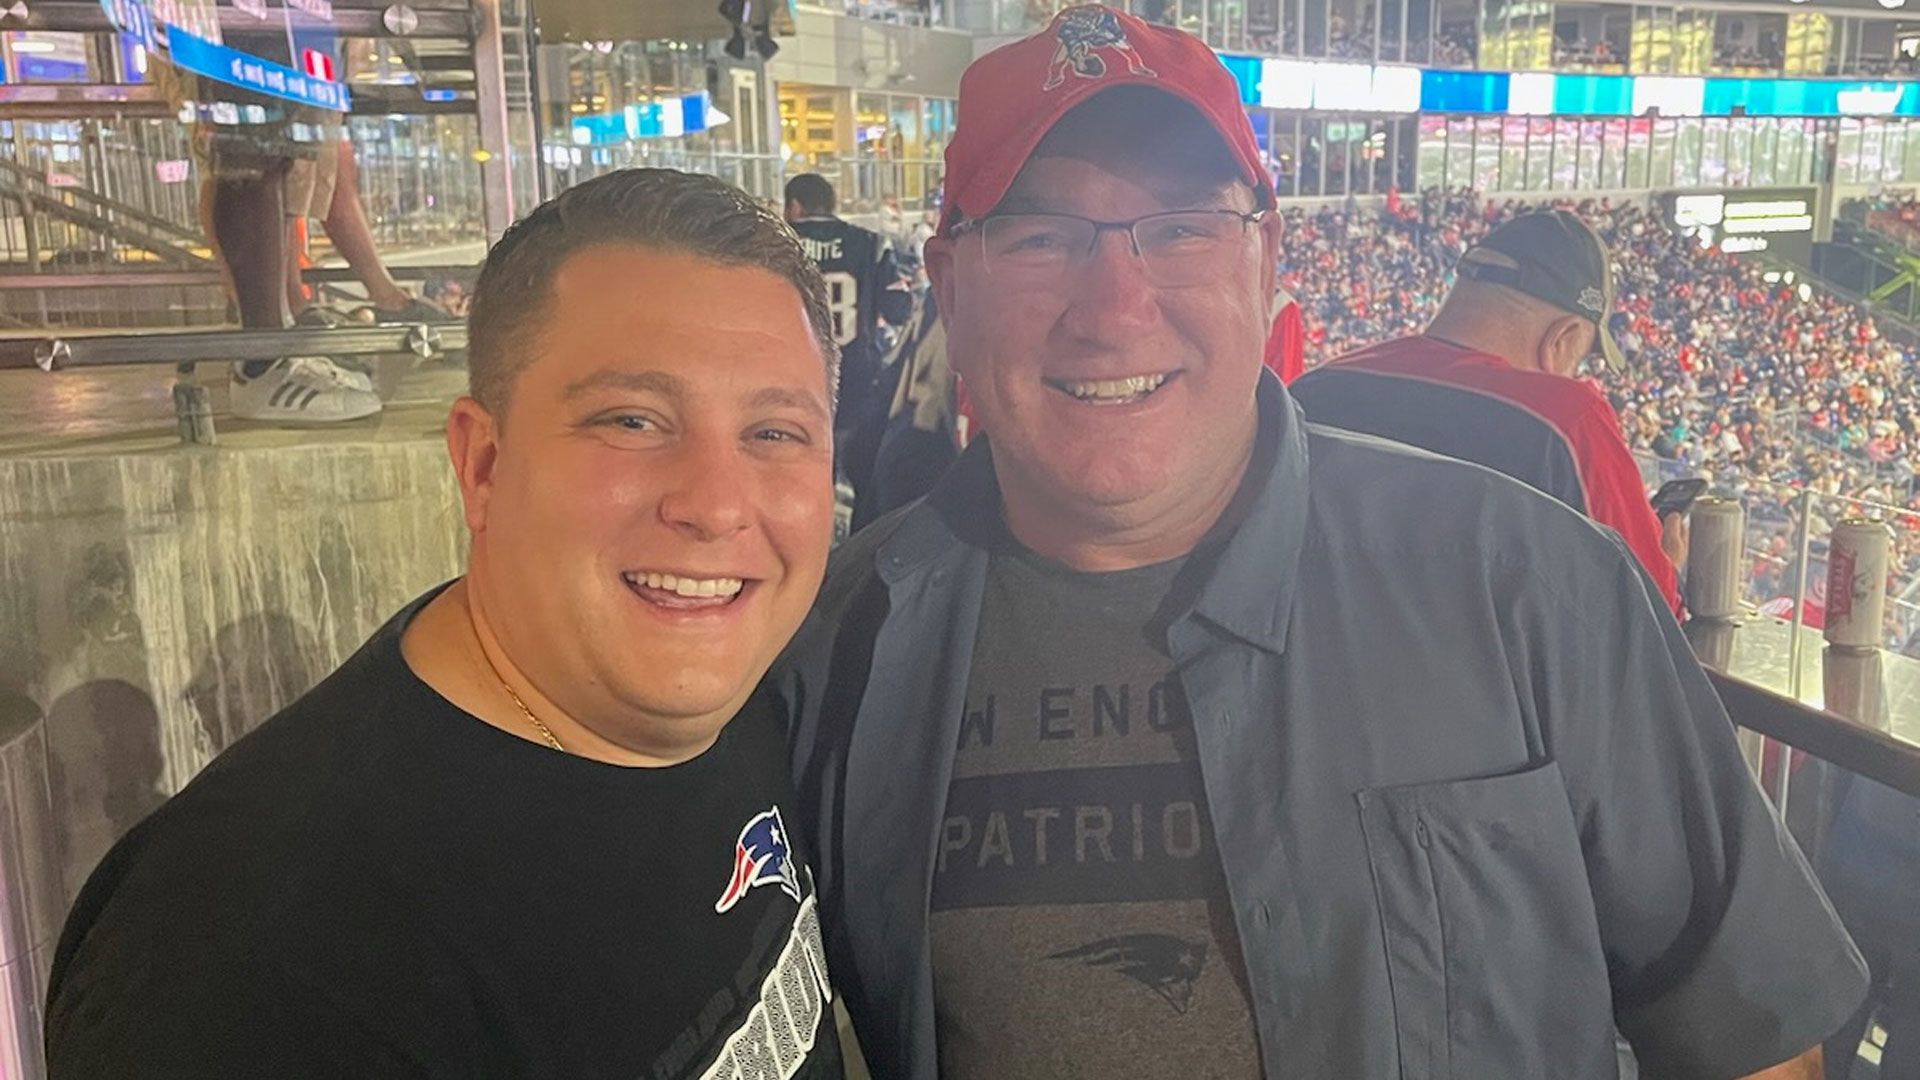 Off-duty firefighters save fan who had heart attack at Patriots game